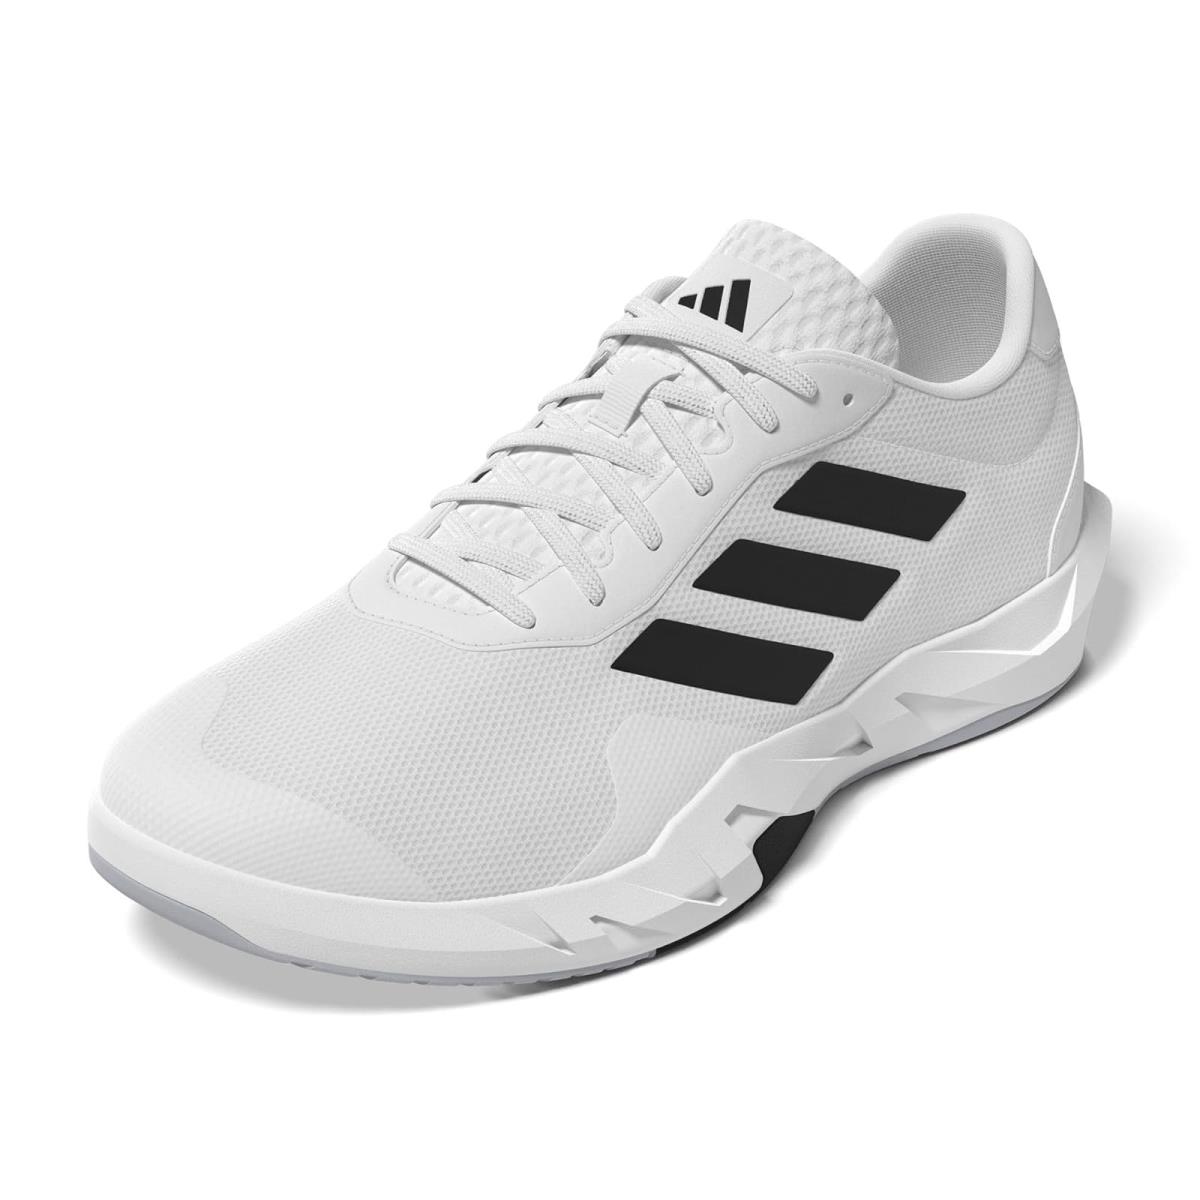 Man`s Sneakers Athletic Shoes Adidas Amplimove Trainer White/Black/Grey